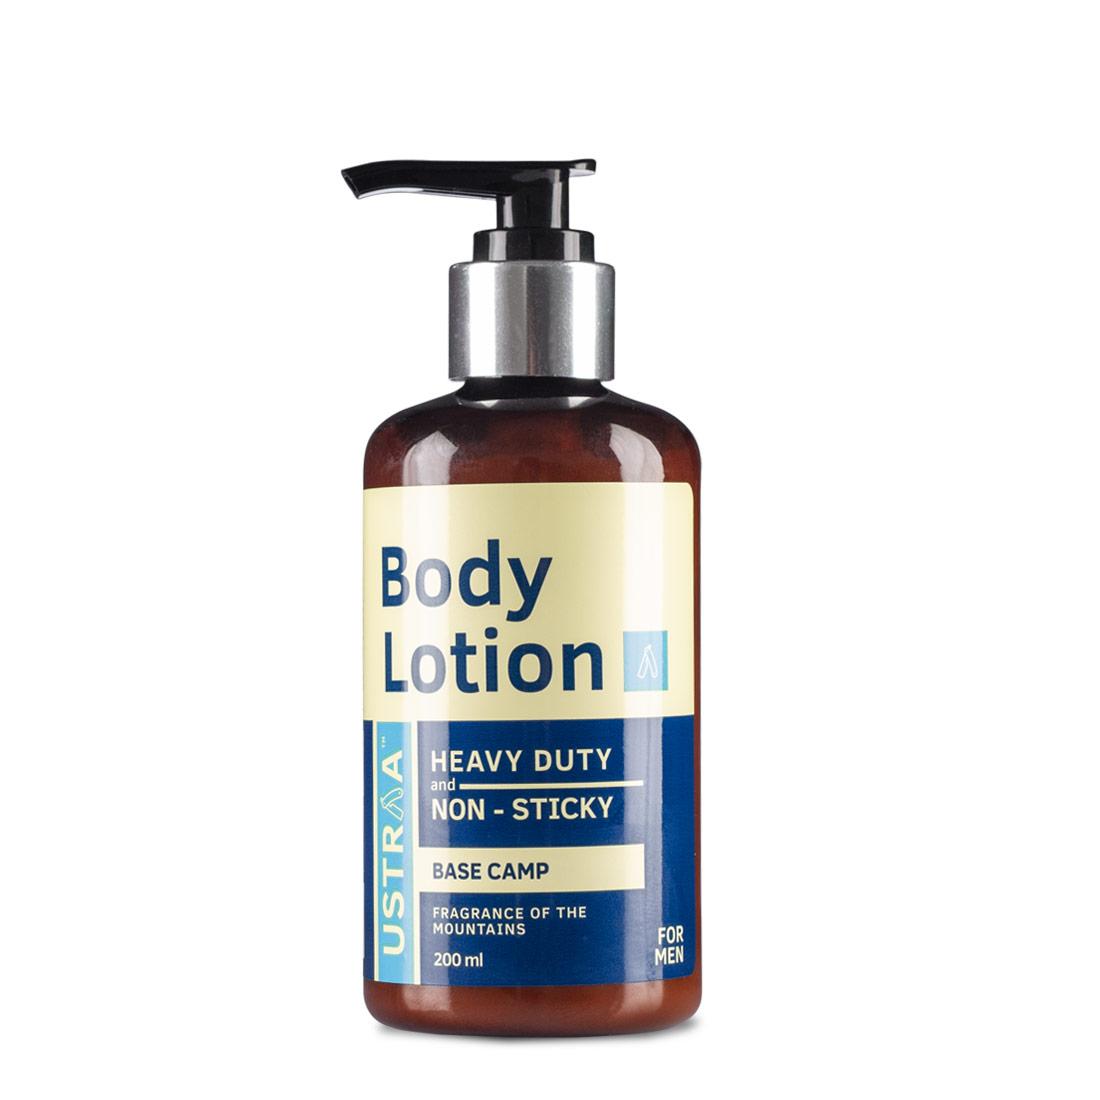 Ustraa Body Lotion -  with Shea Butter, Vitamin E, Wild Flax Seed Extract for a Heavy duty Moisturization without Stickiness - 200 ml